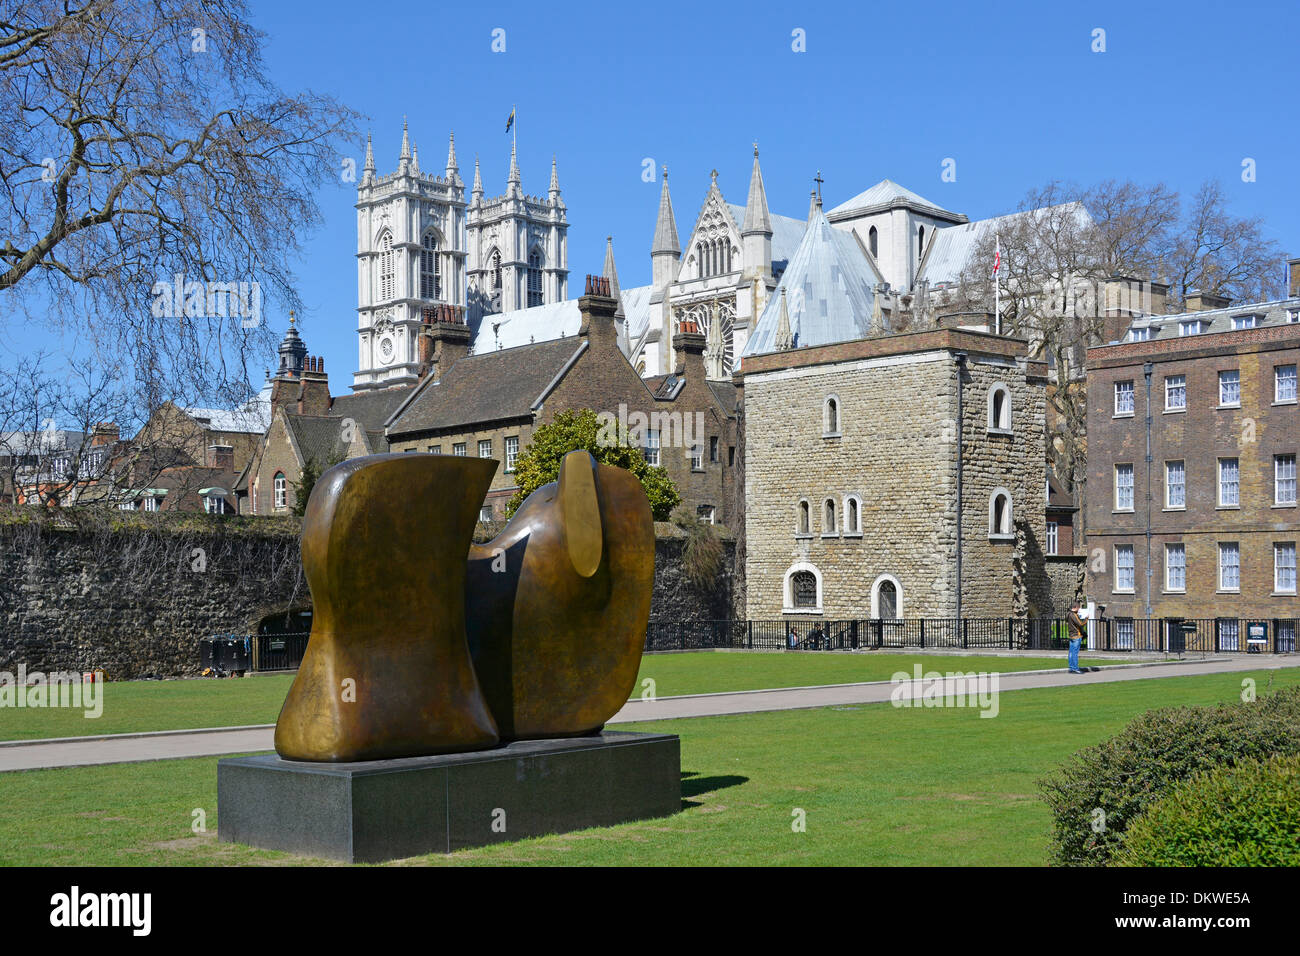 Sculptor Henry Moore bronze abstract modern art sculpture Knife Edge Two Piece in College Green Park Jewel Tower & Westminster Abbey beyond London UK Stock Photo